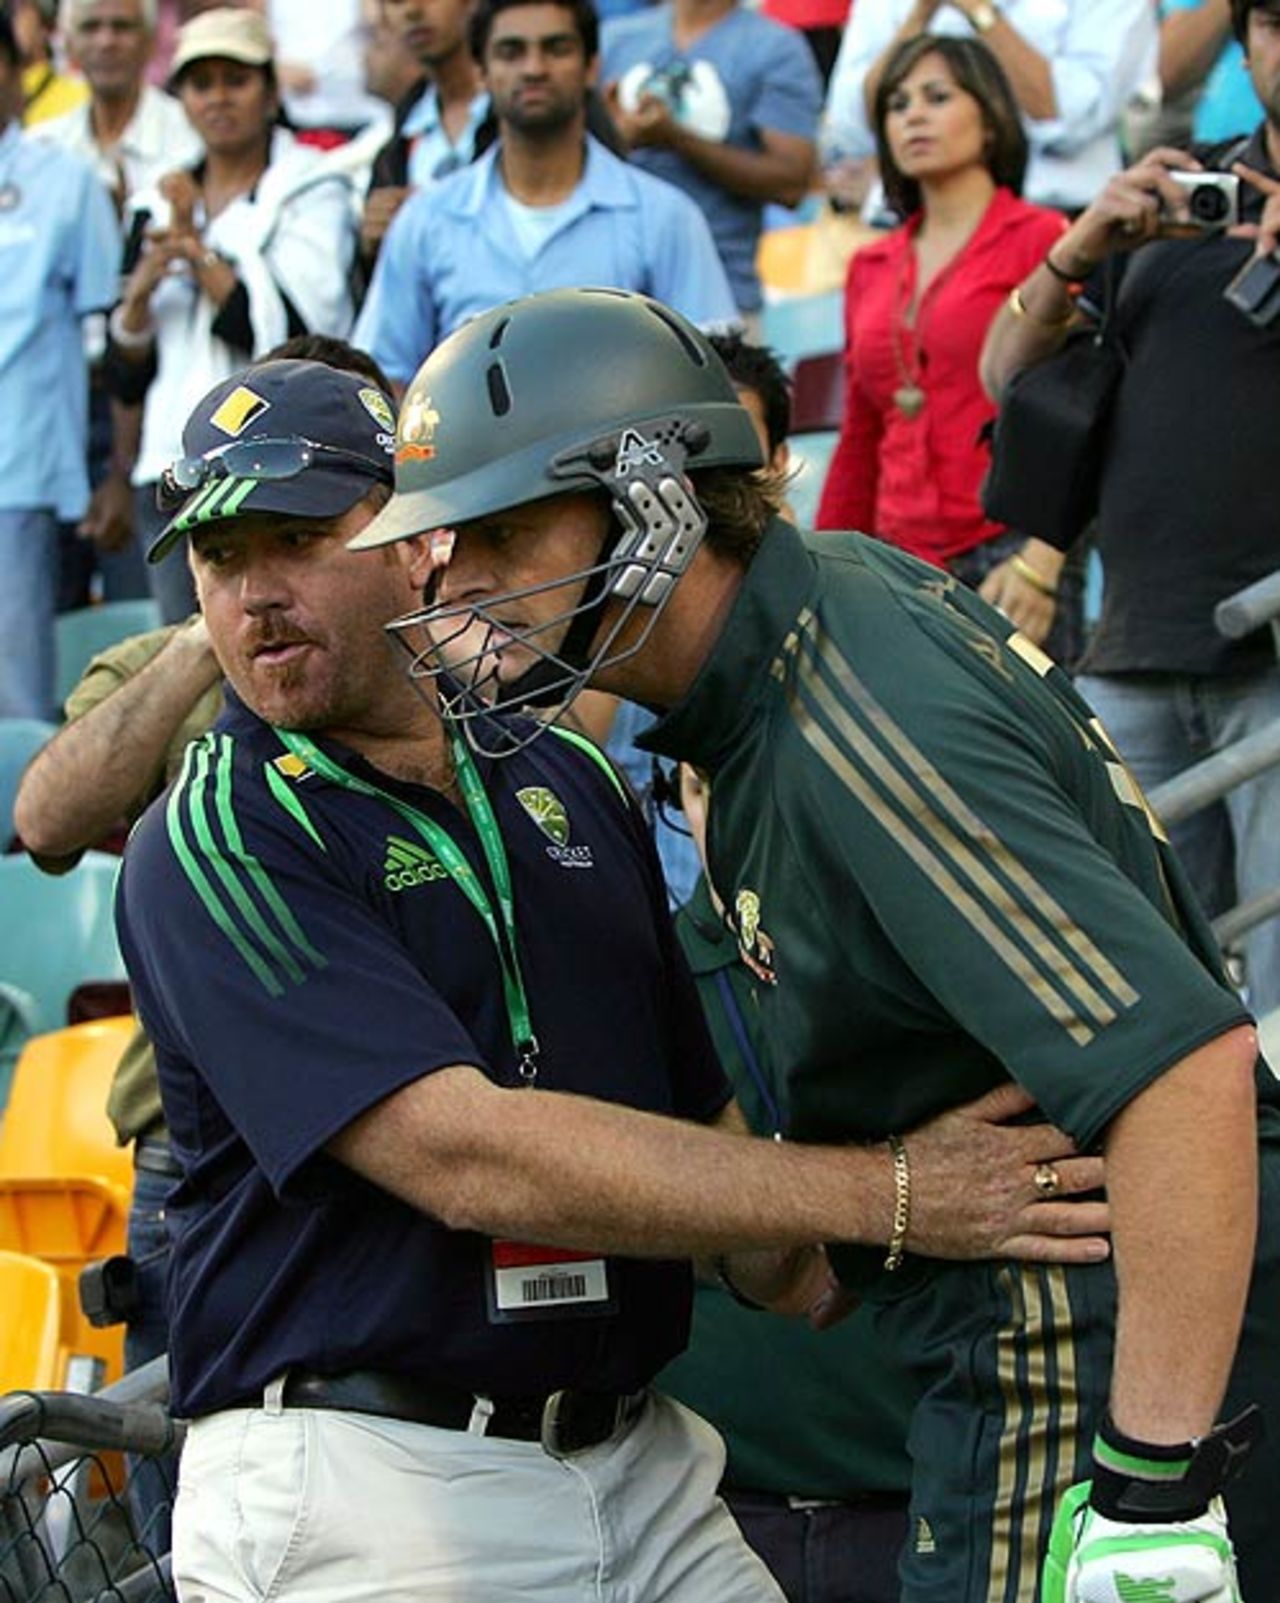 An official restrains Adam Gilchrist following an altercation with a cameraman, Australia v India, CB Series, 2nd final, Brisbane, March 4, 2008 